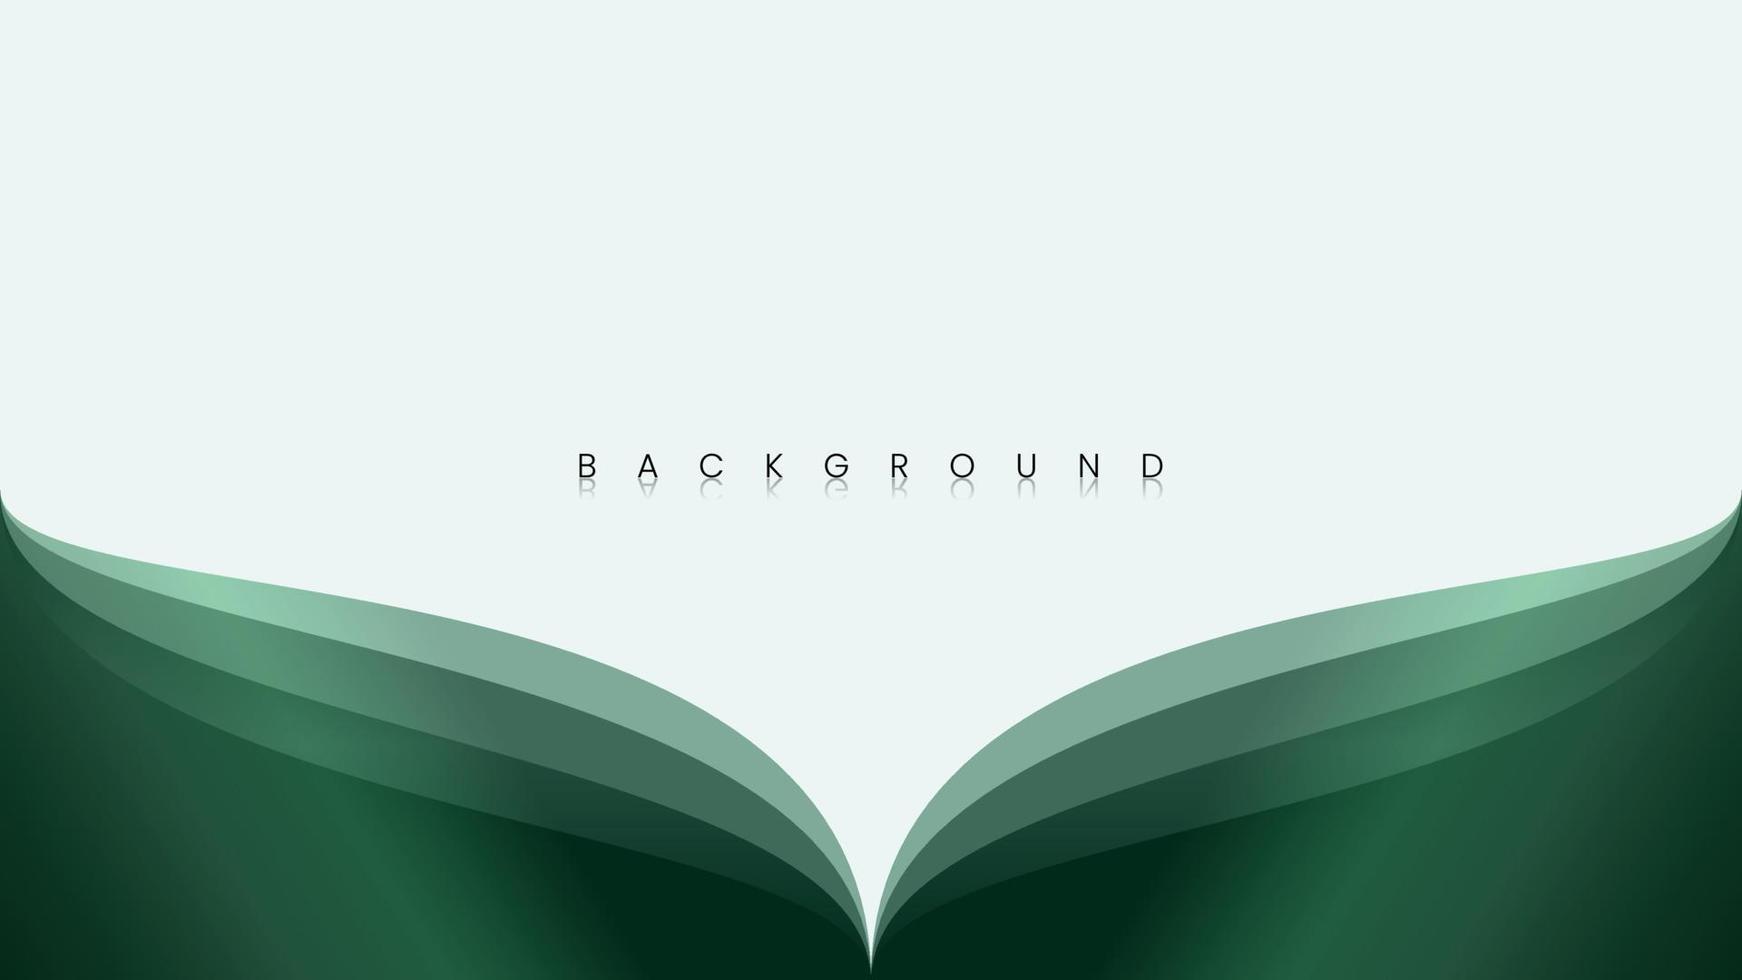 Nature Background Theme with Green Gradation. Suitable for Designs with Beauty and Nature Theme Backgrounds, Flyers, Posters, Social Media Posts, and other Design Templates. vector